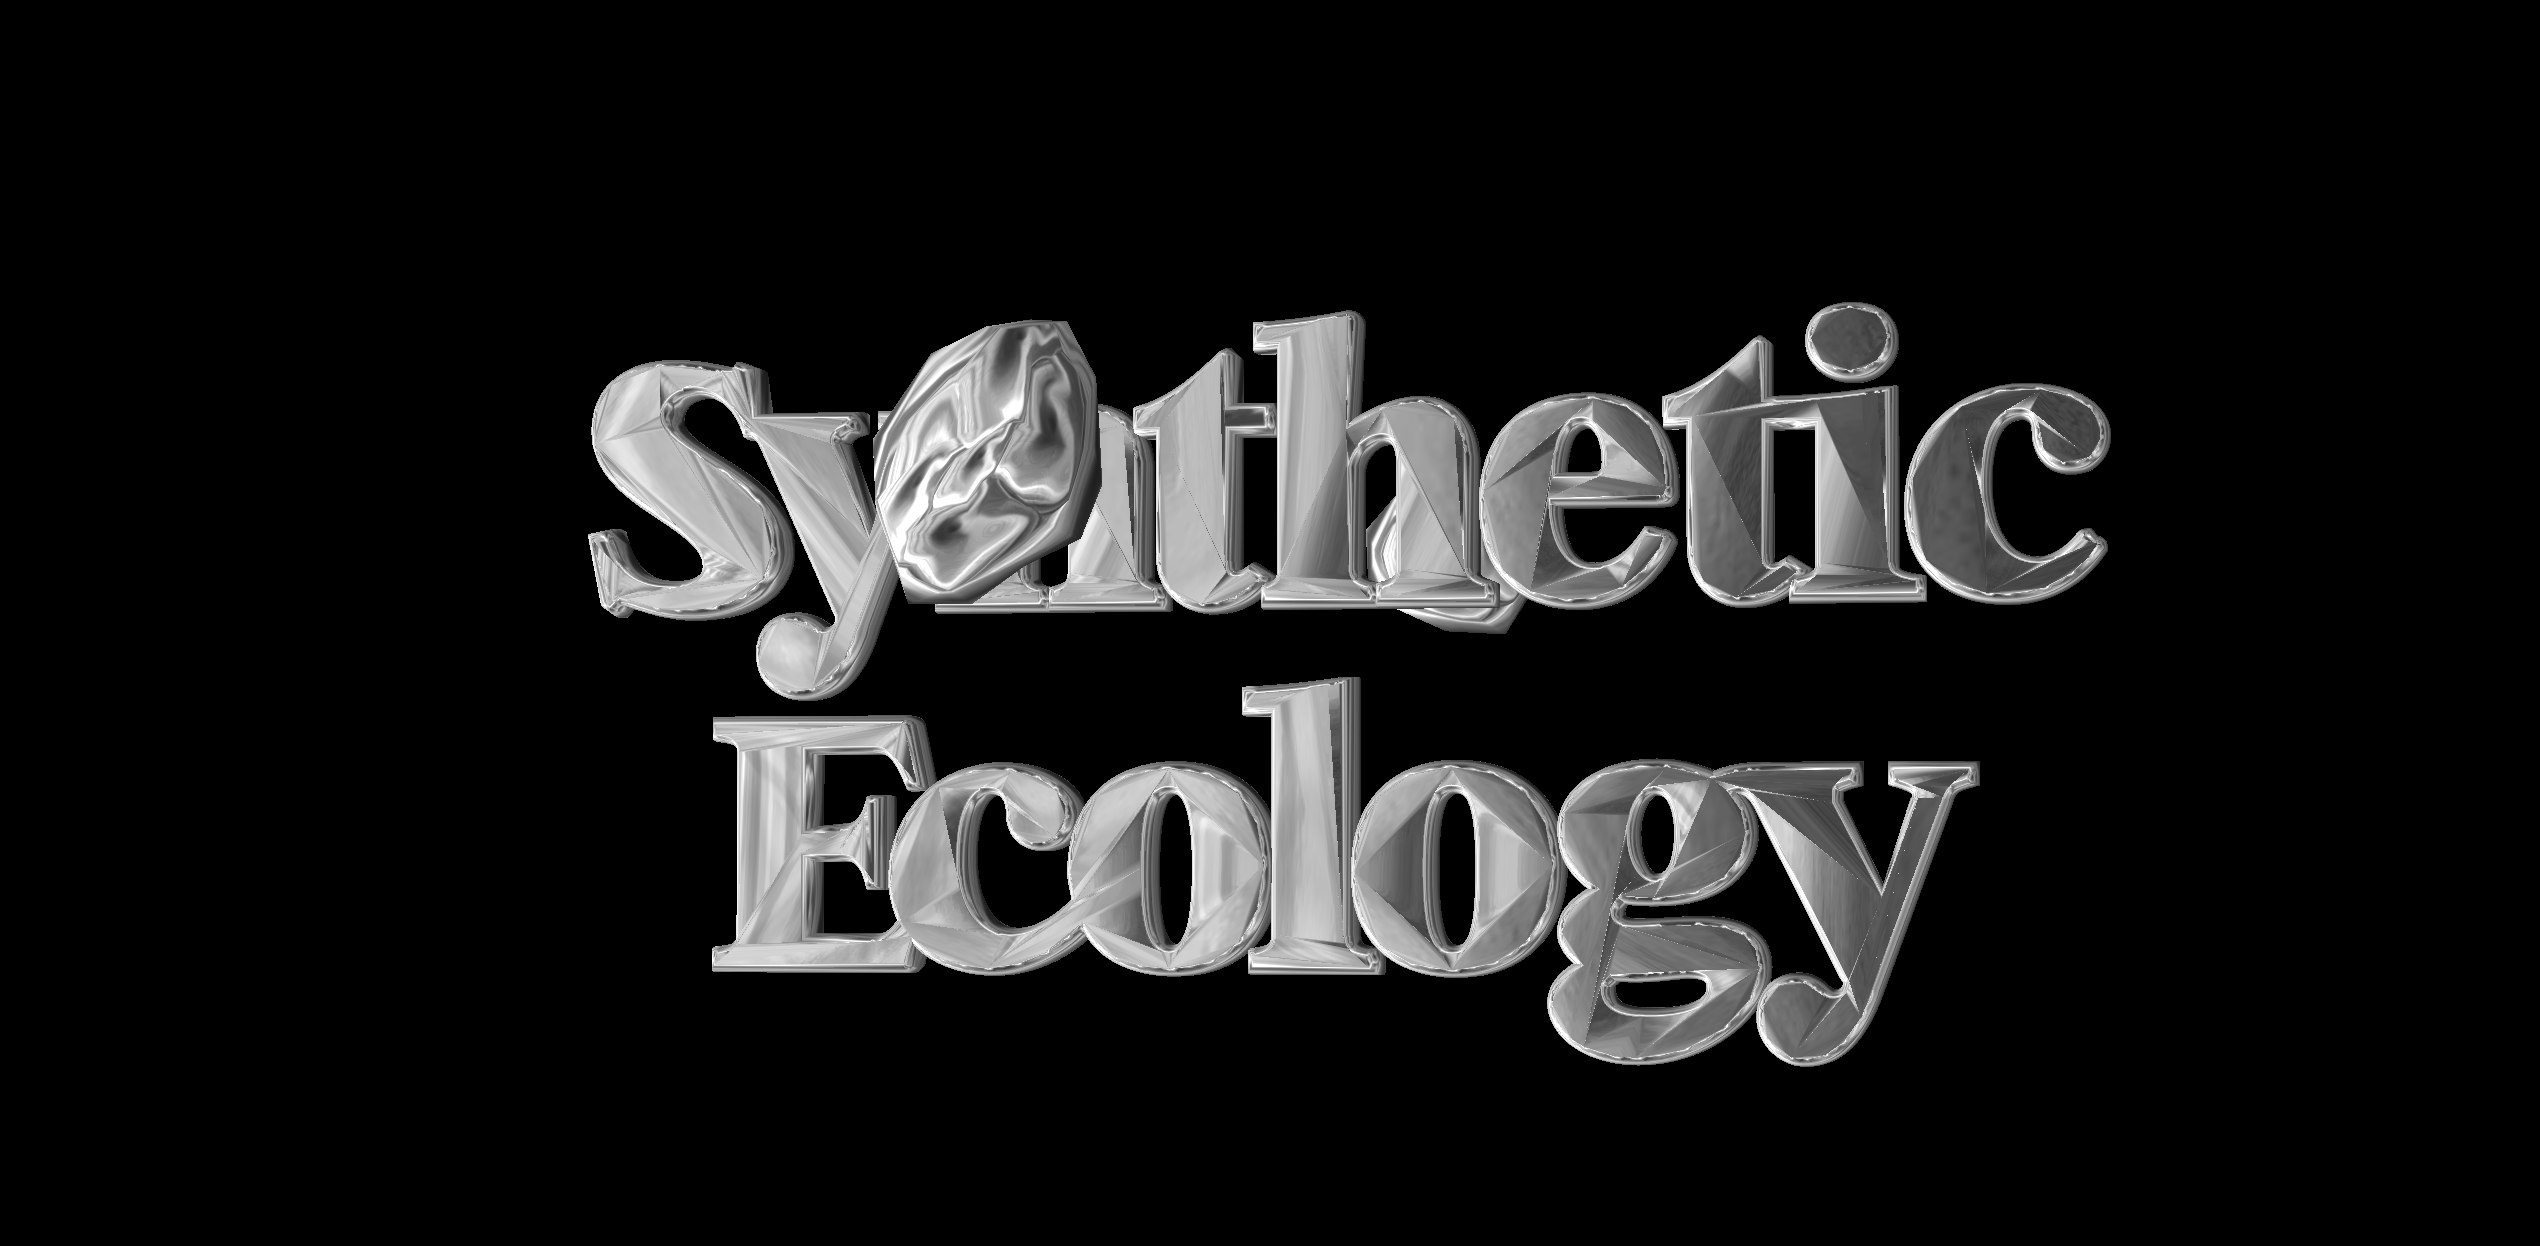 syntheticecology